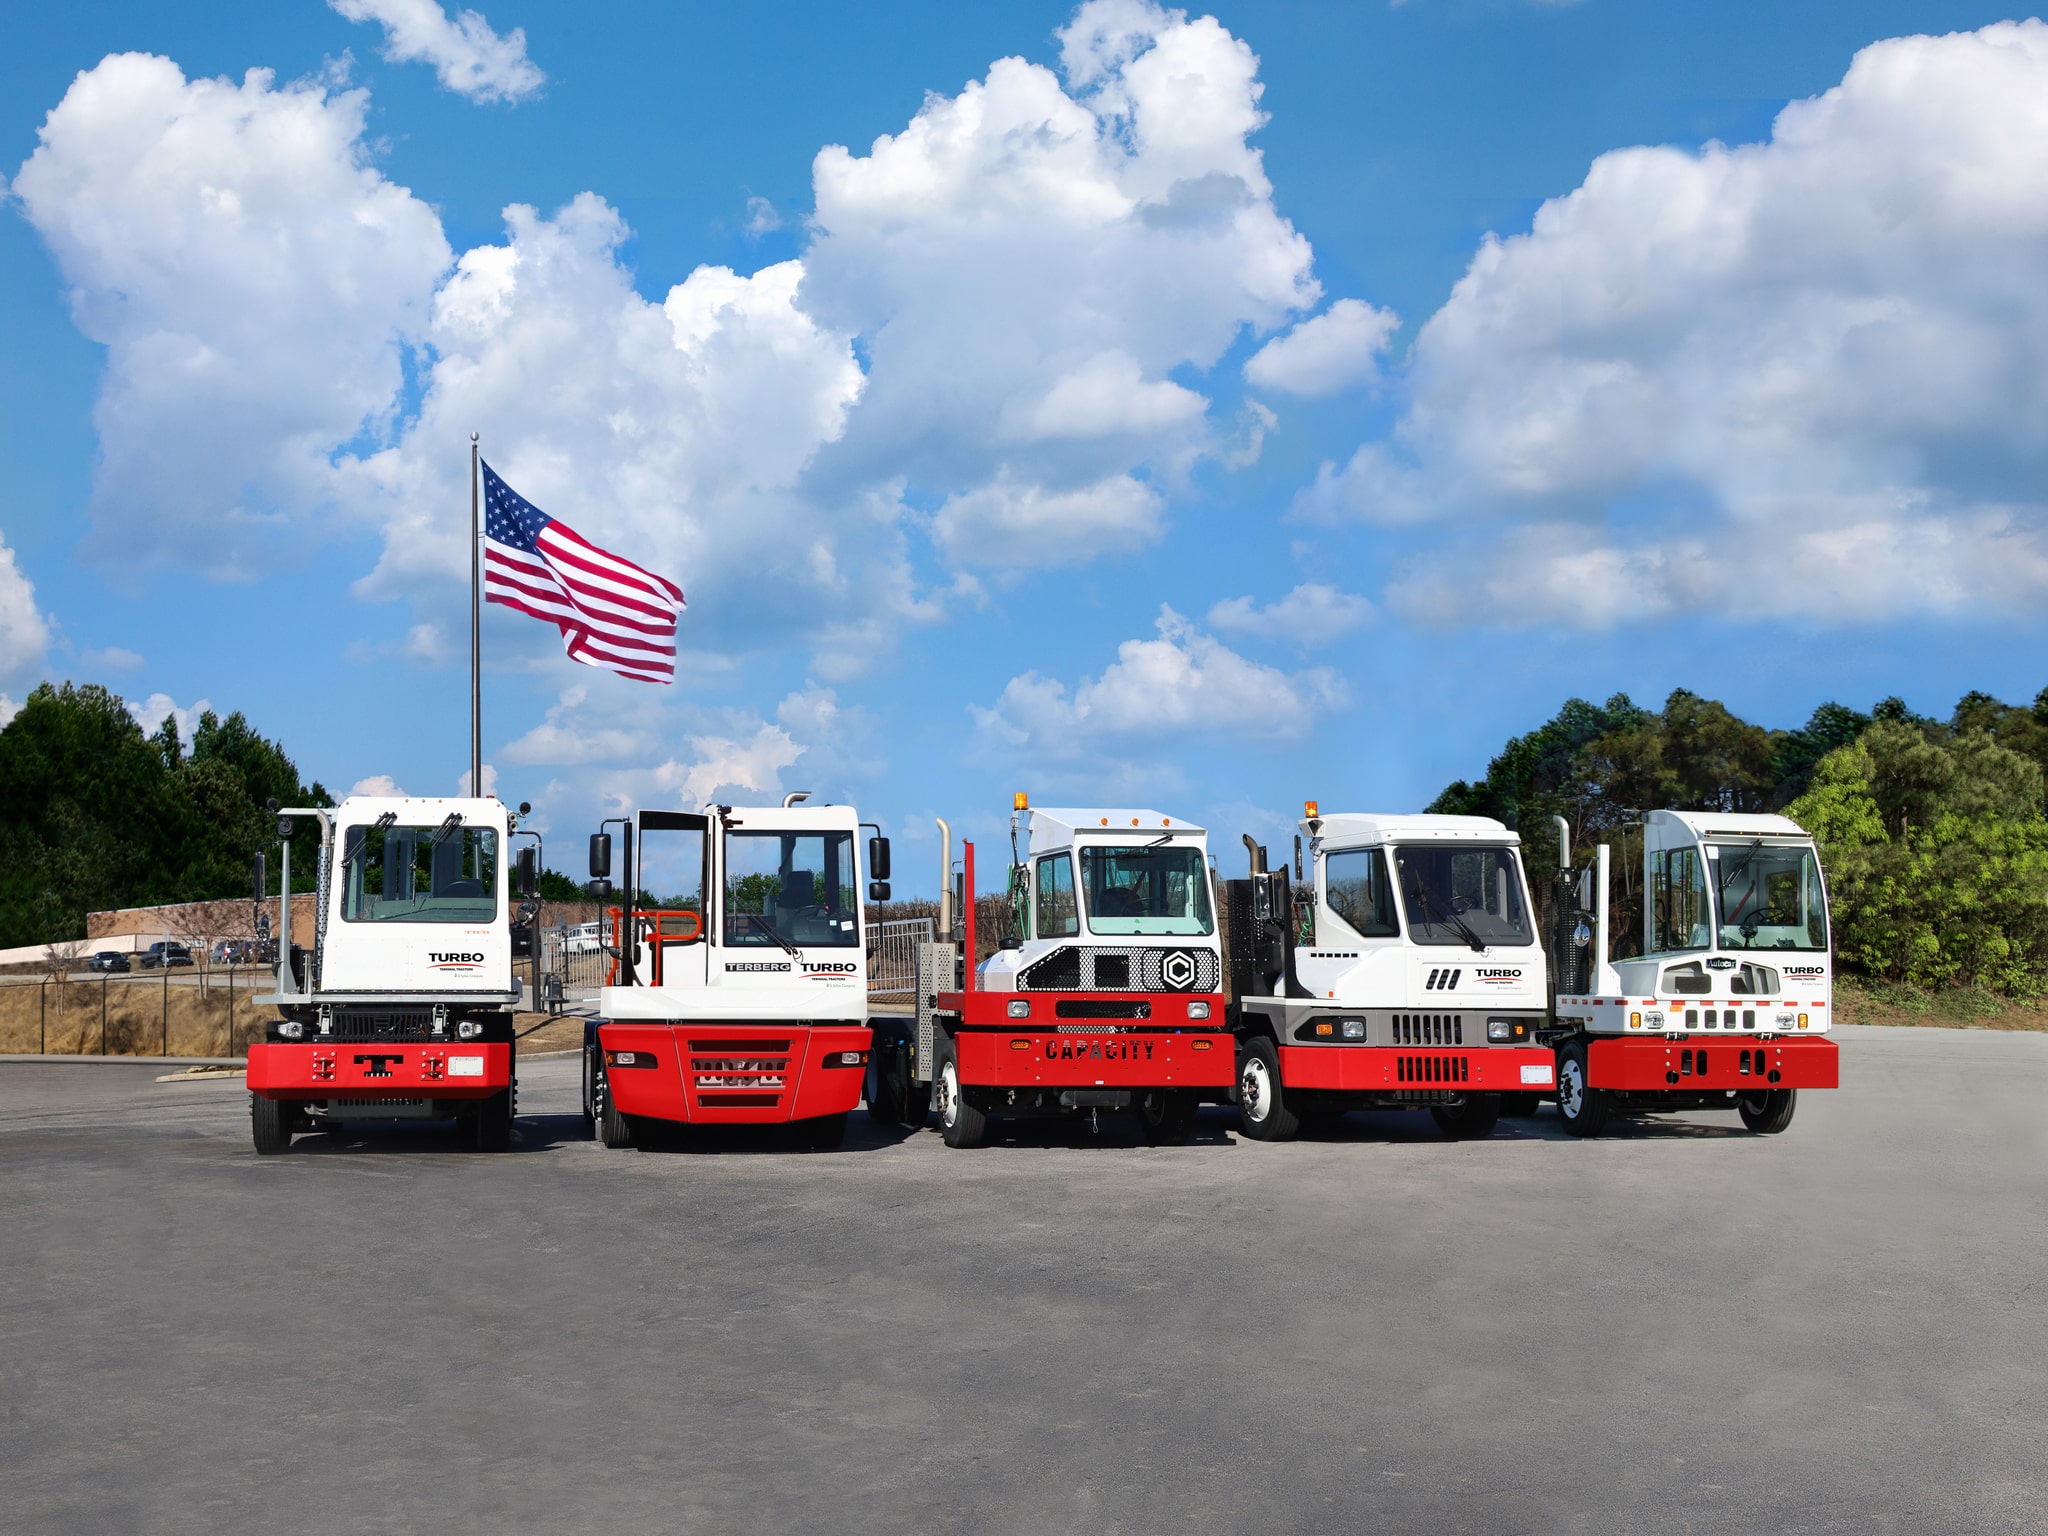 5 Turbo Terminal Tractor Spotter Trucks for sale lined up on the concrete in front of the American flag and pretty blue sky.